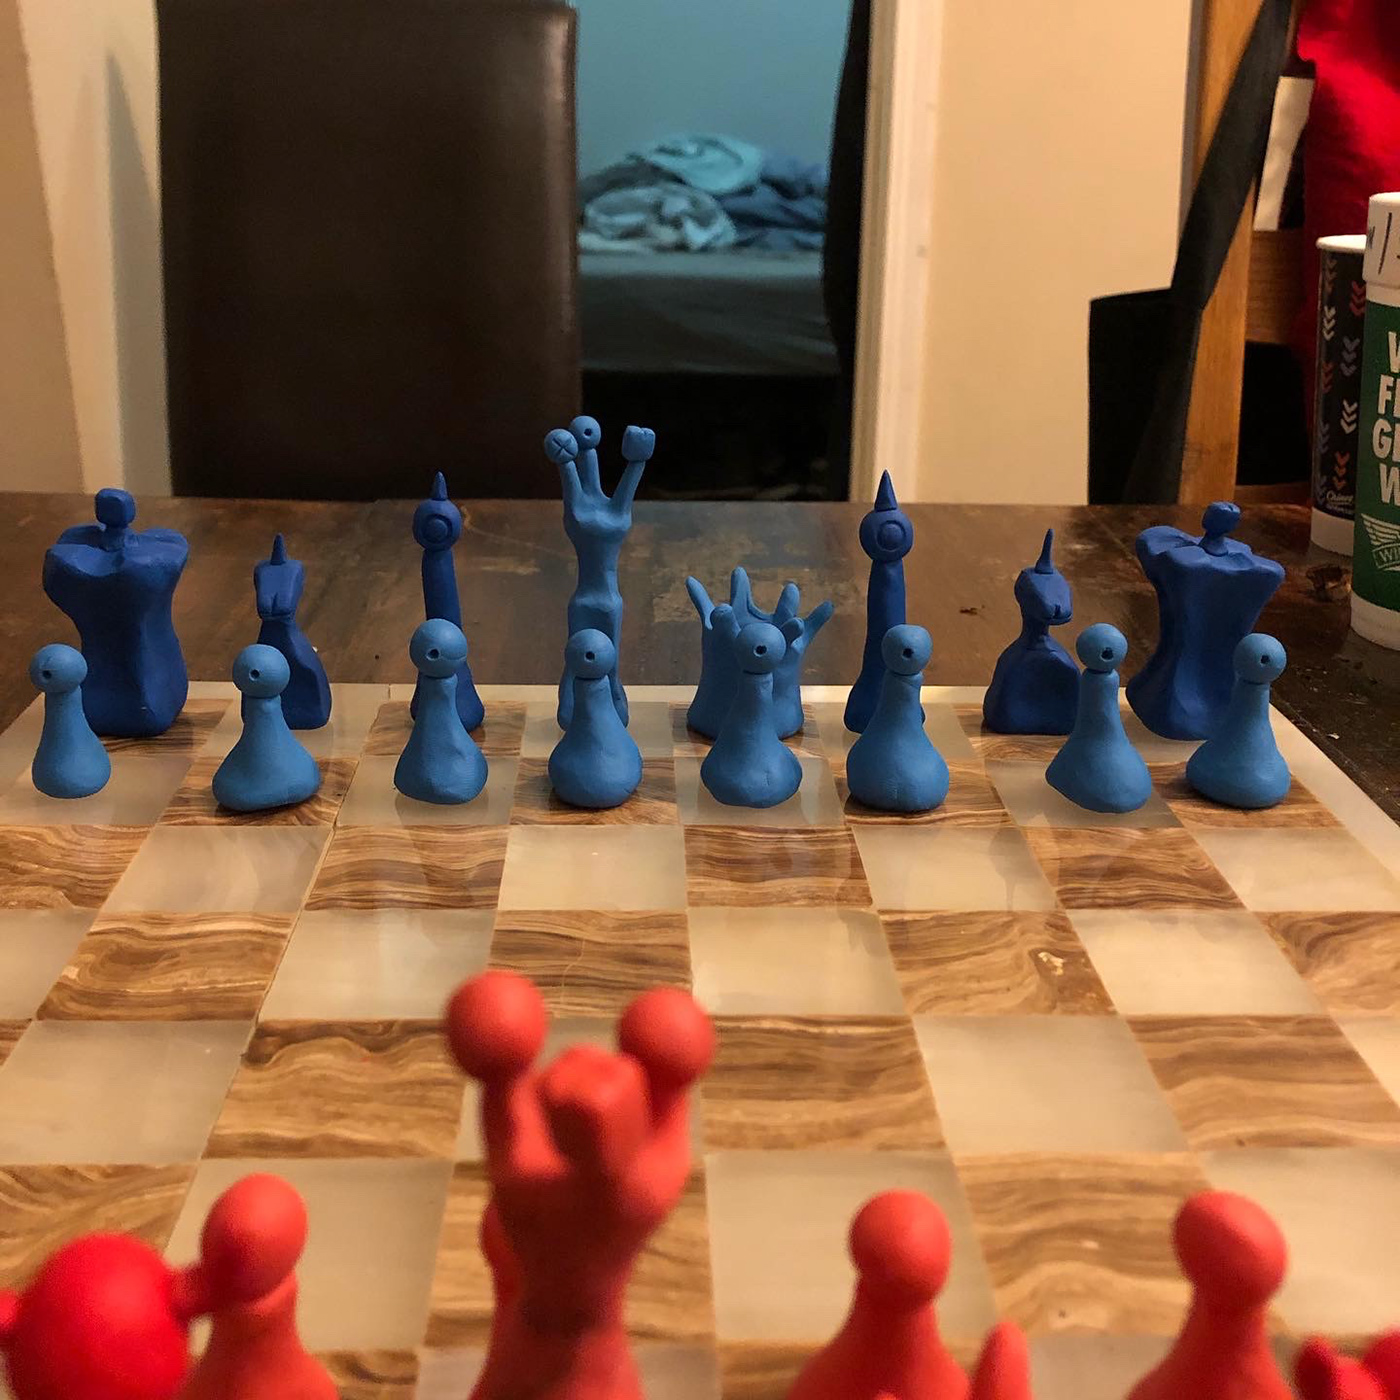 Clay chess board games